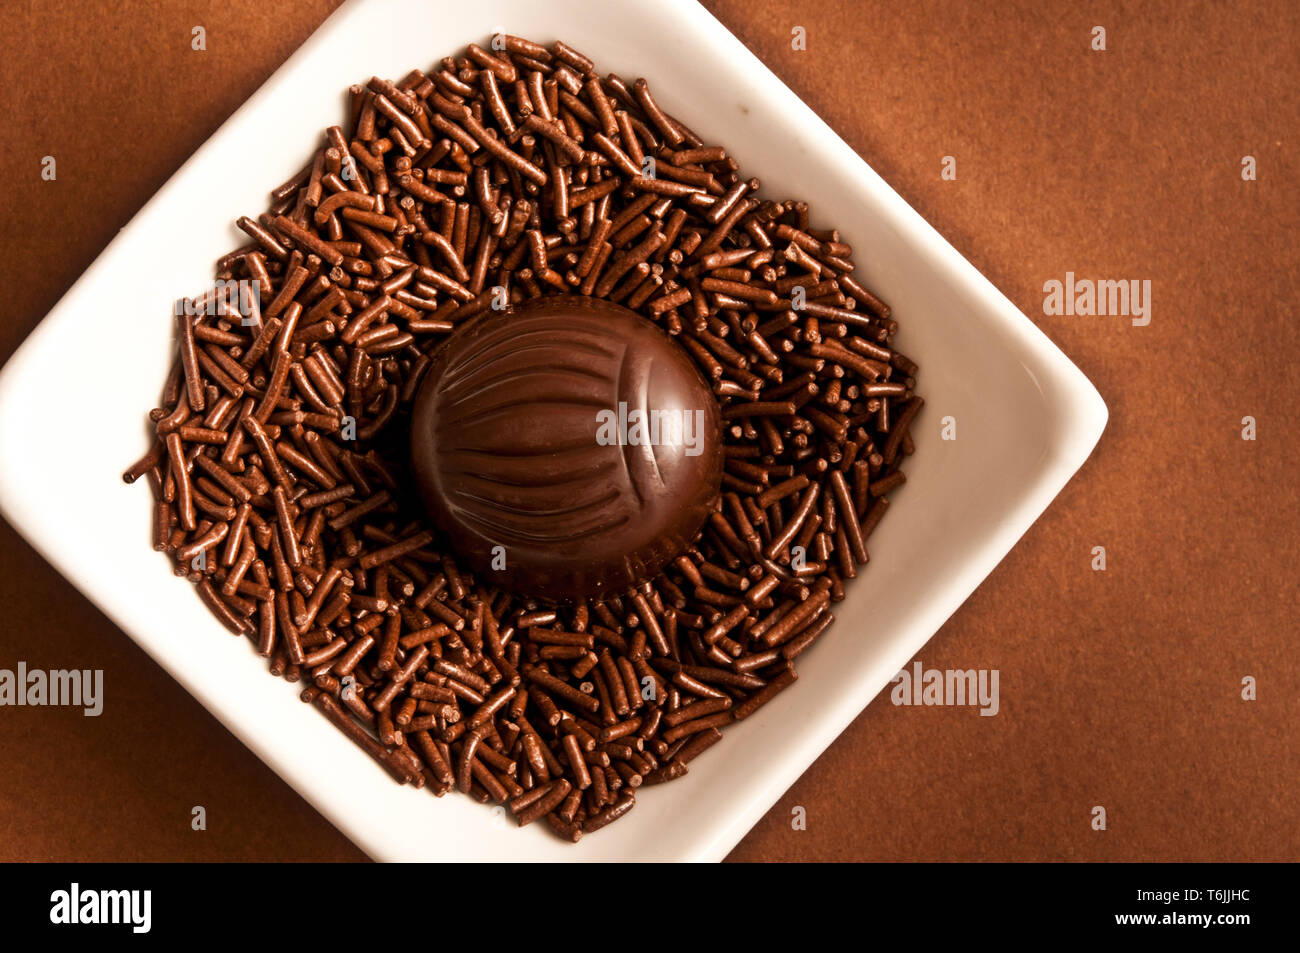 chocolate bonbon on a bed of chocolate sprinkles Stock Photo